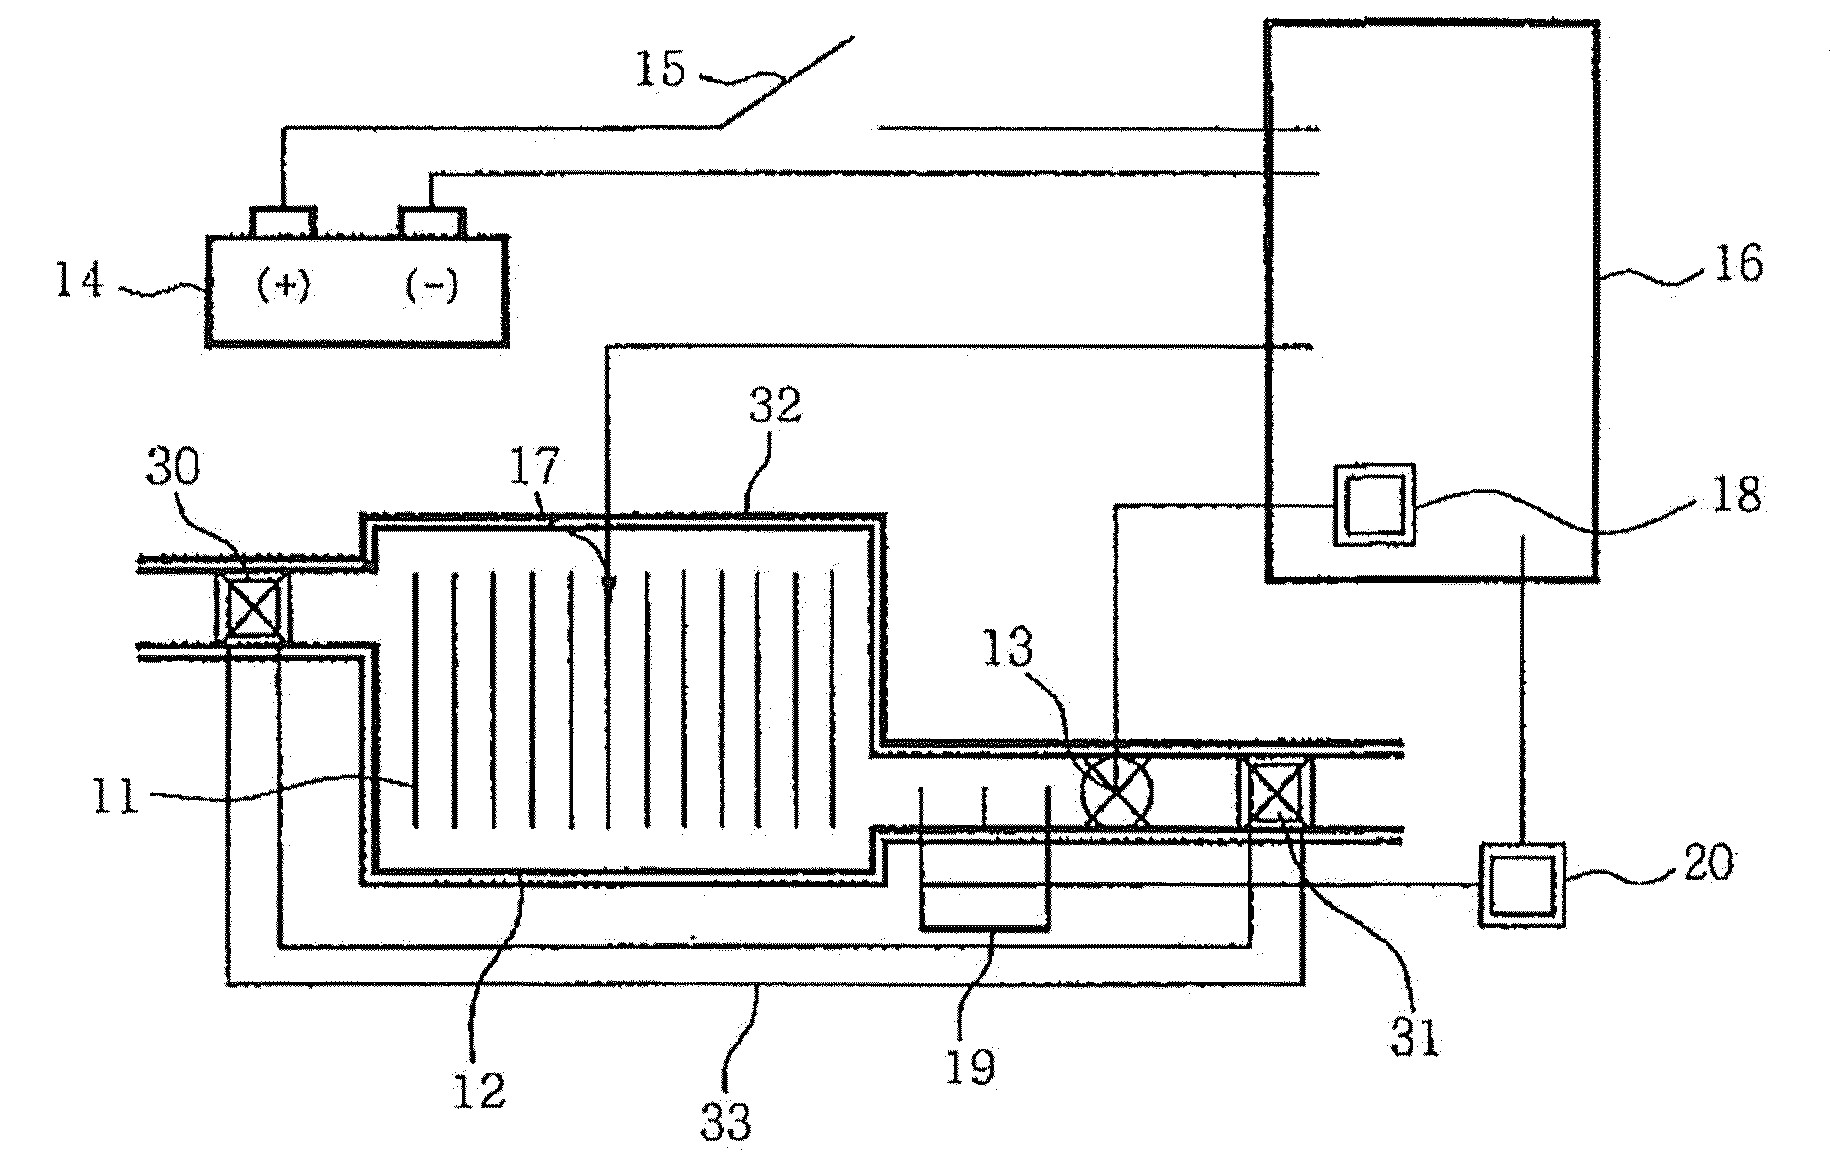 Battery temperature controller for electric vehicle using thermoelectric semiconductor